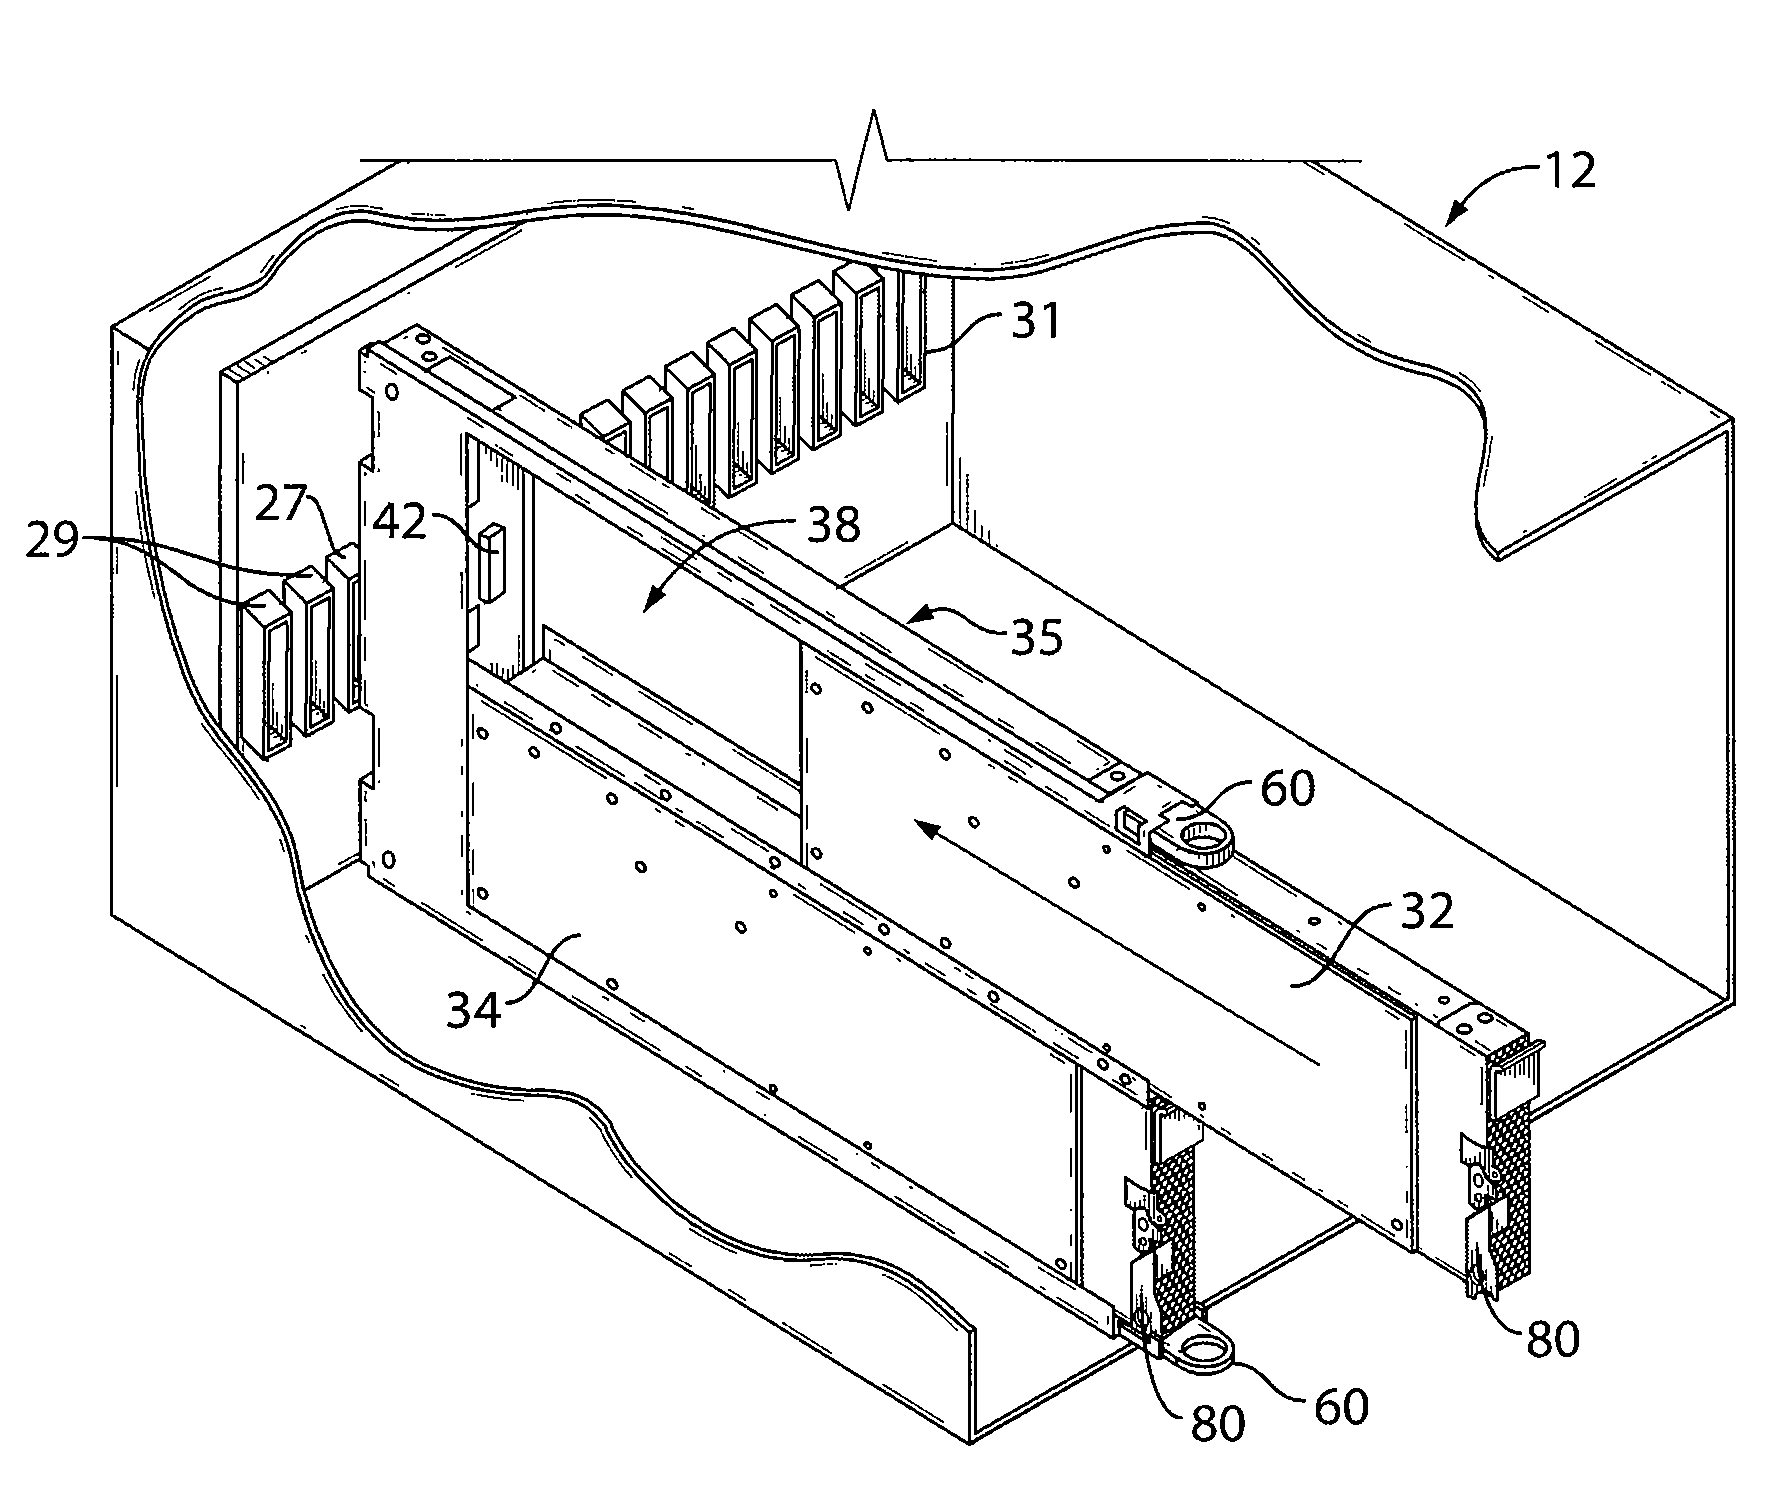 Design structure for an interposer for expanded capability of a blade server chassis system